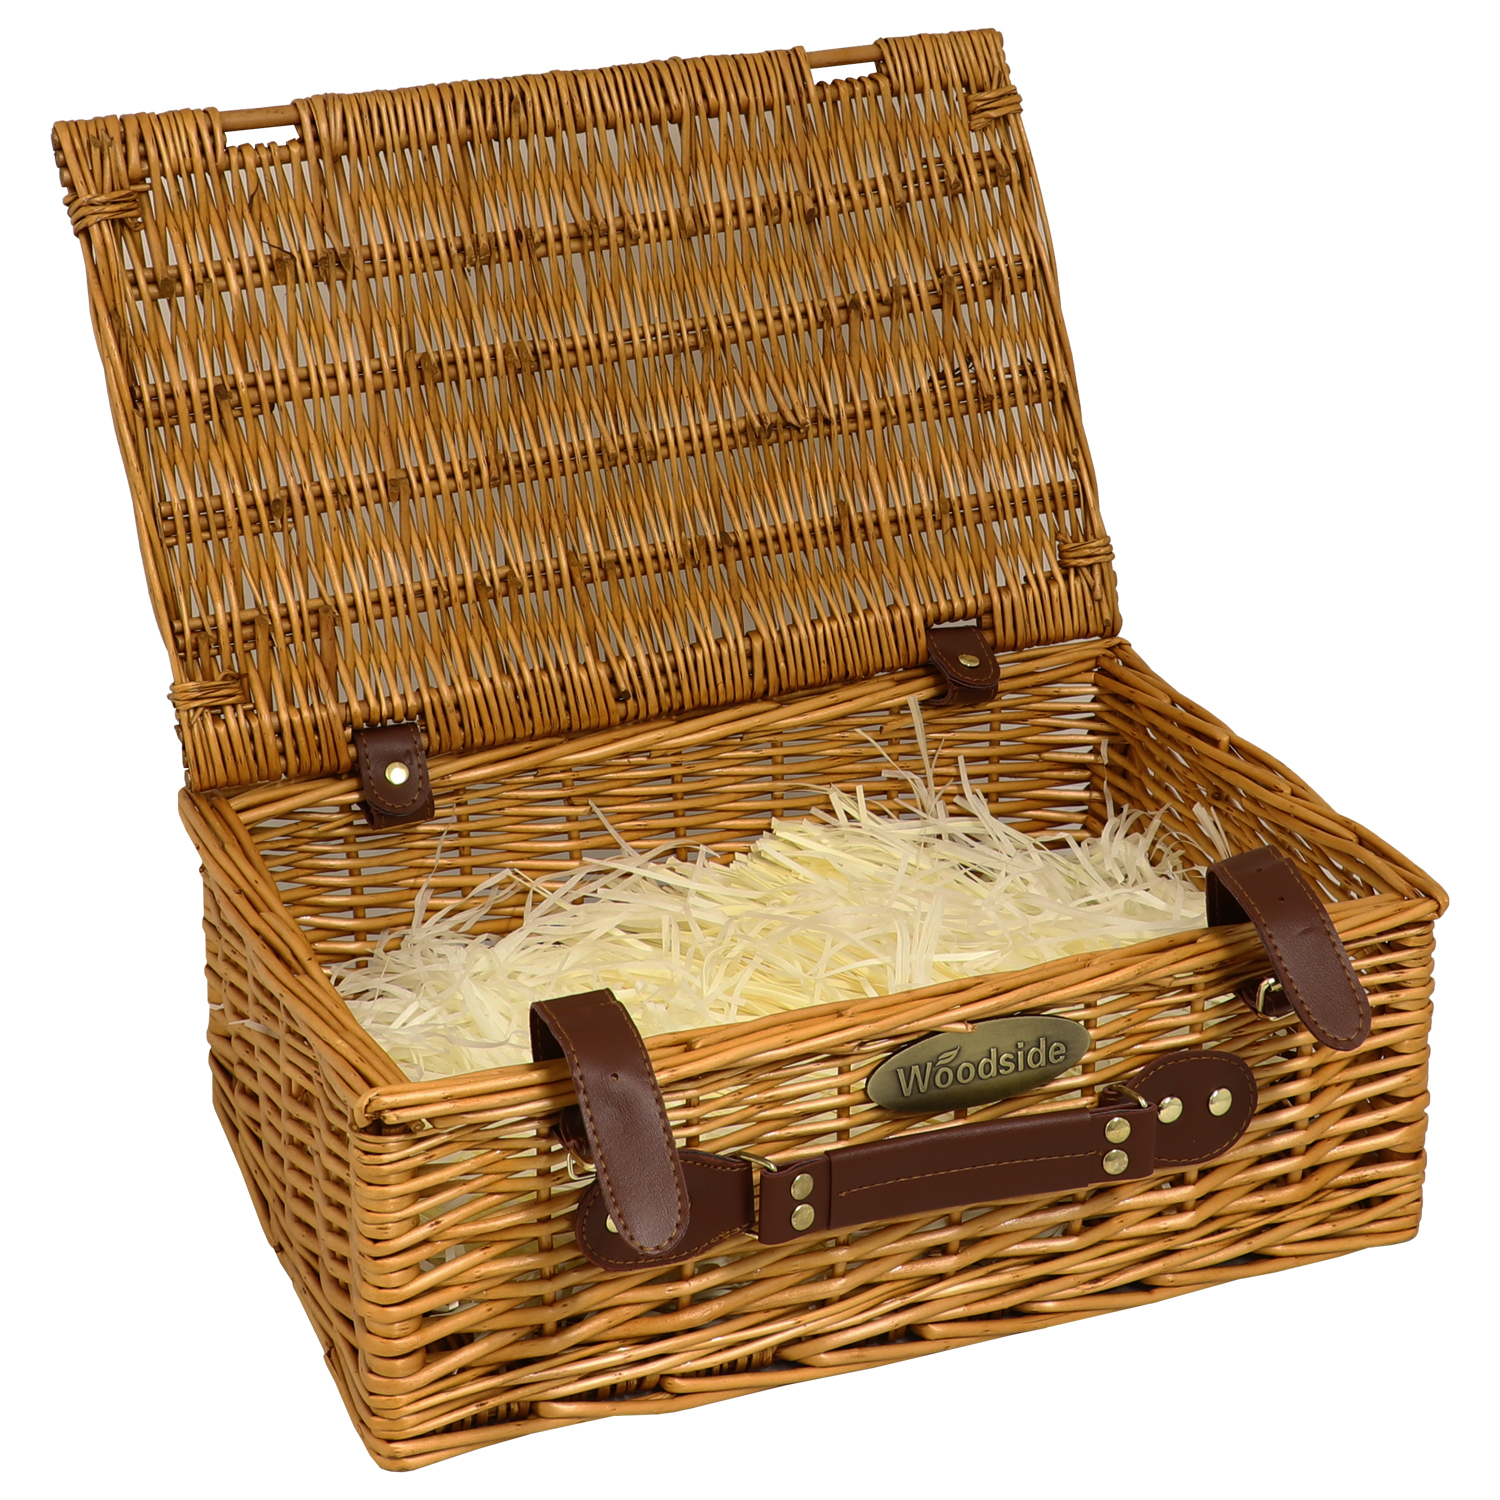 Woodside Wicker Picnic/Christmas Gift Hamper Basket with Leather Handle ...